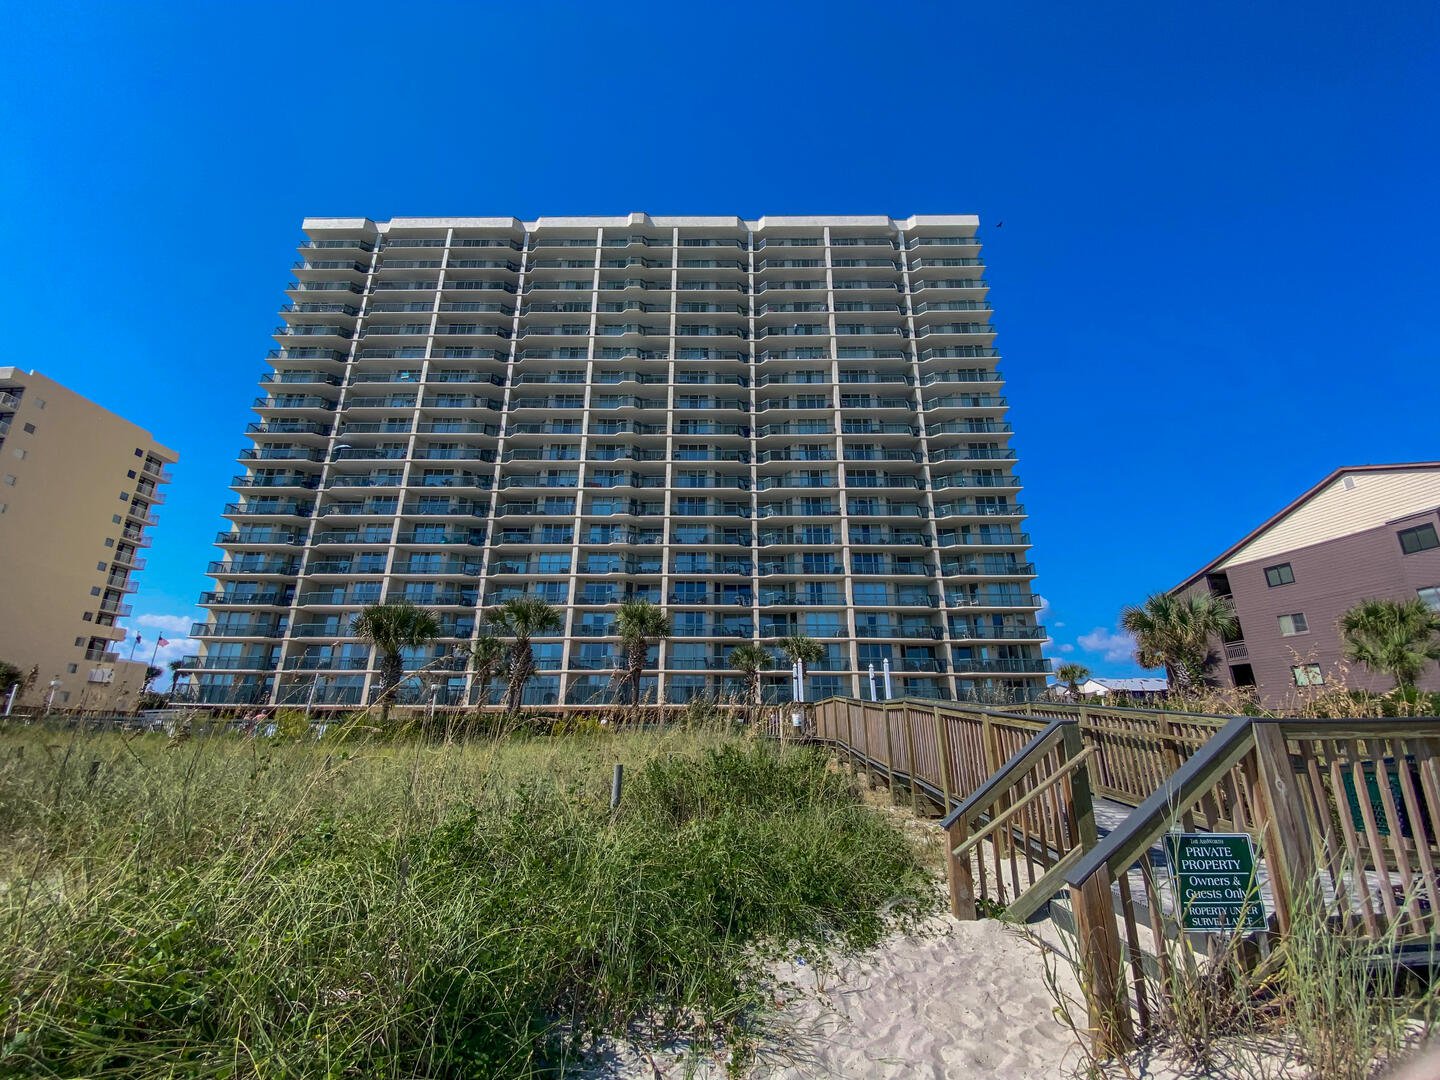 Best Area in Myrtle Beach to Stay: 4 Reasons to Stay Central